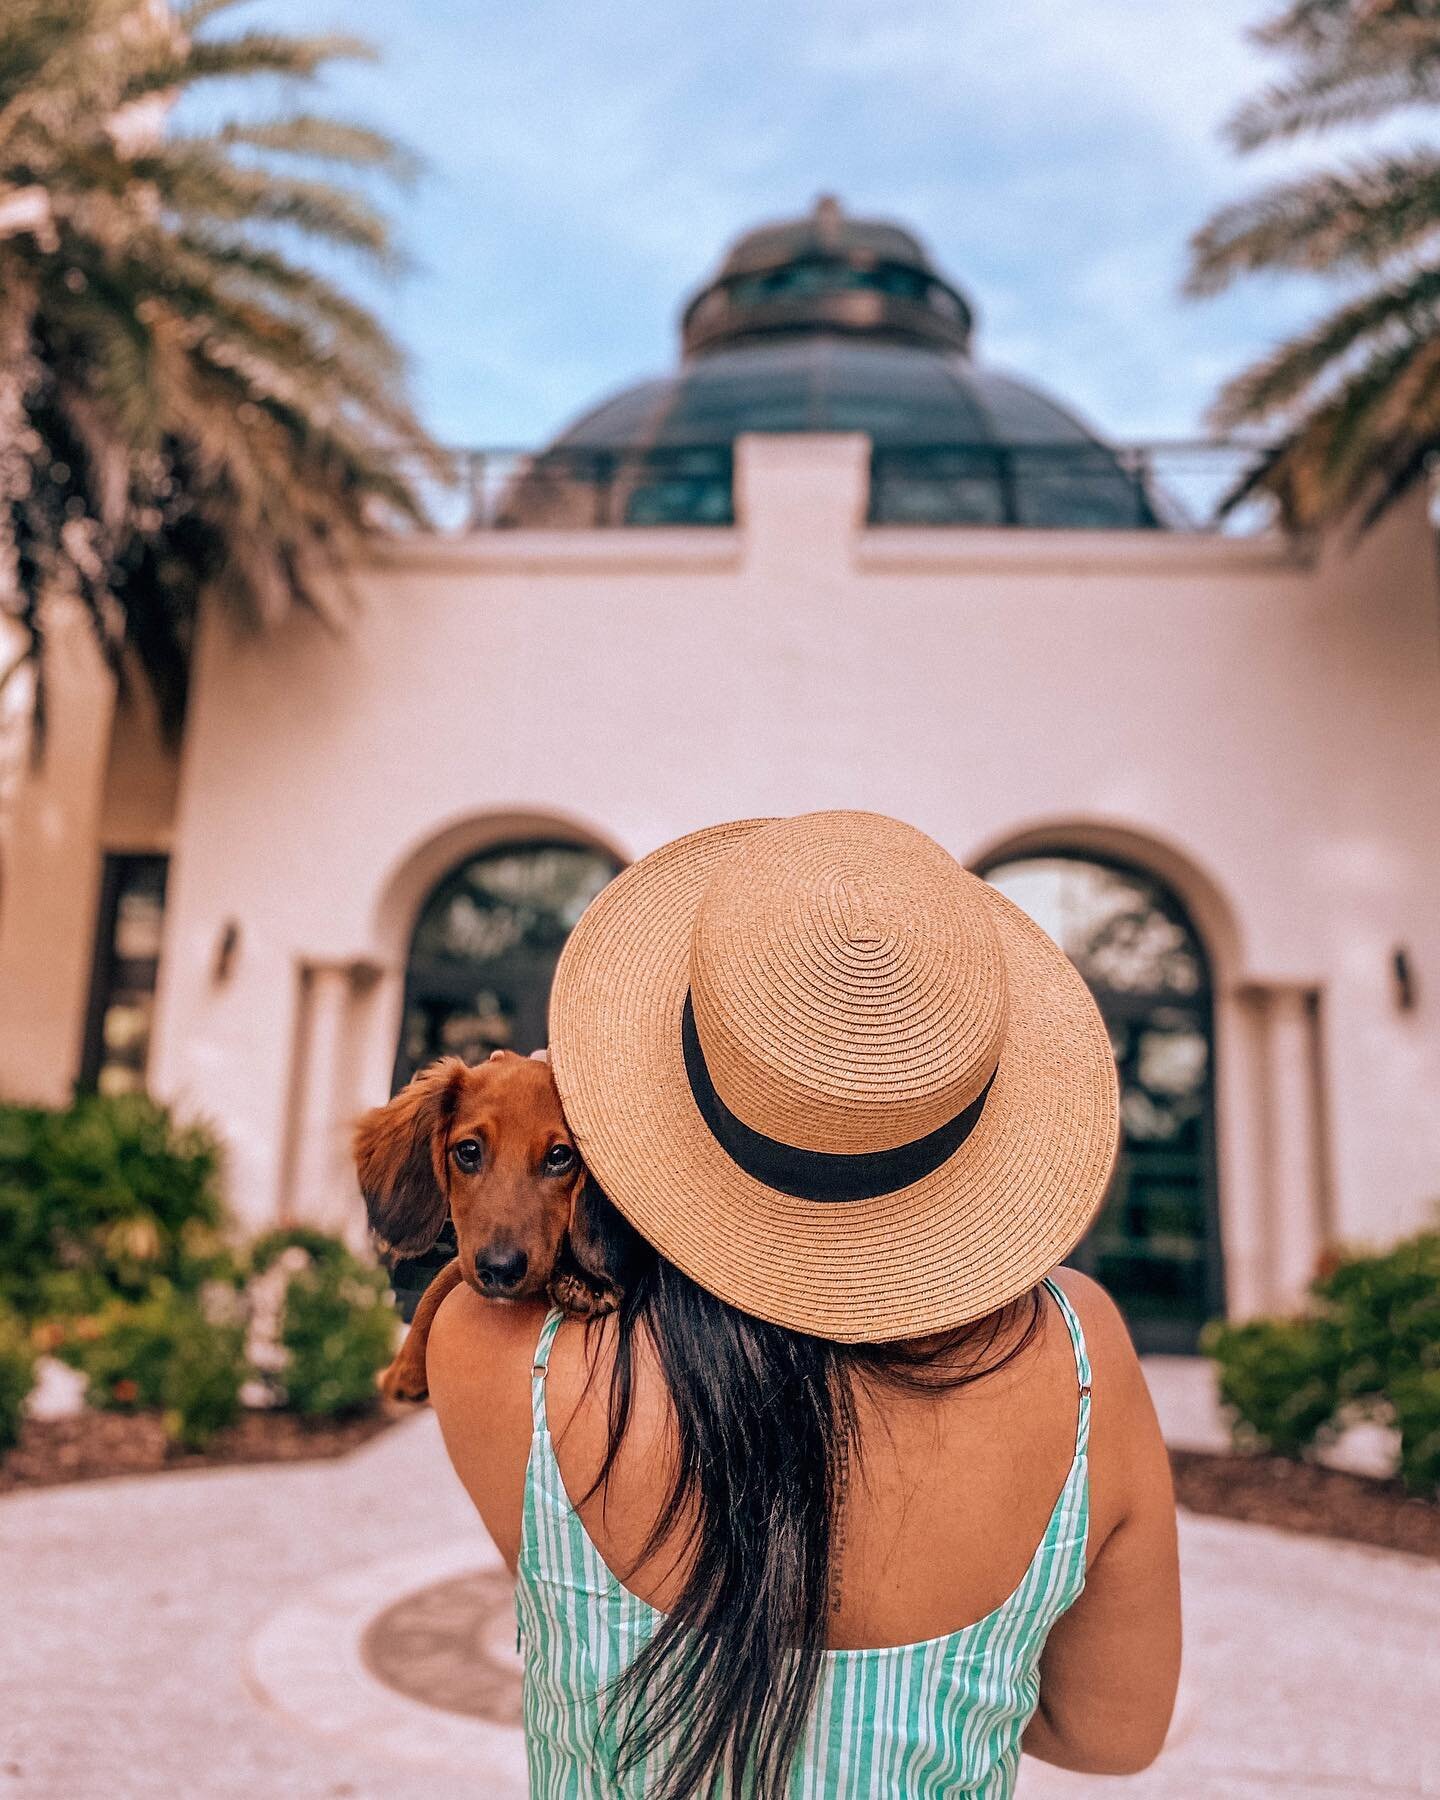 🐾 𝗦𝗔𝗩𝗘 IF YOU 𝗧𝗥𝗔𝗩𝗘𝗟 (OR WANT TO) 𝗪𝗜𝗧𝗛 𝗬𝗢𝗨𝗥 𝗣𝗘𝗧! 🐾

How dog friendly is @thealfondinn? 
[SWIPE] This friendly!

When I got my puppy Brodie back in November I knew my solo traveling life was about to change, in a BIG way. As an 